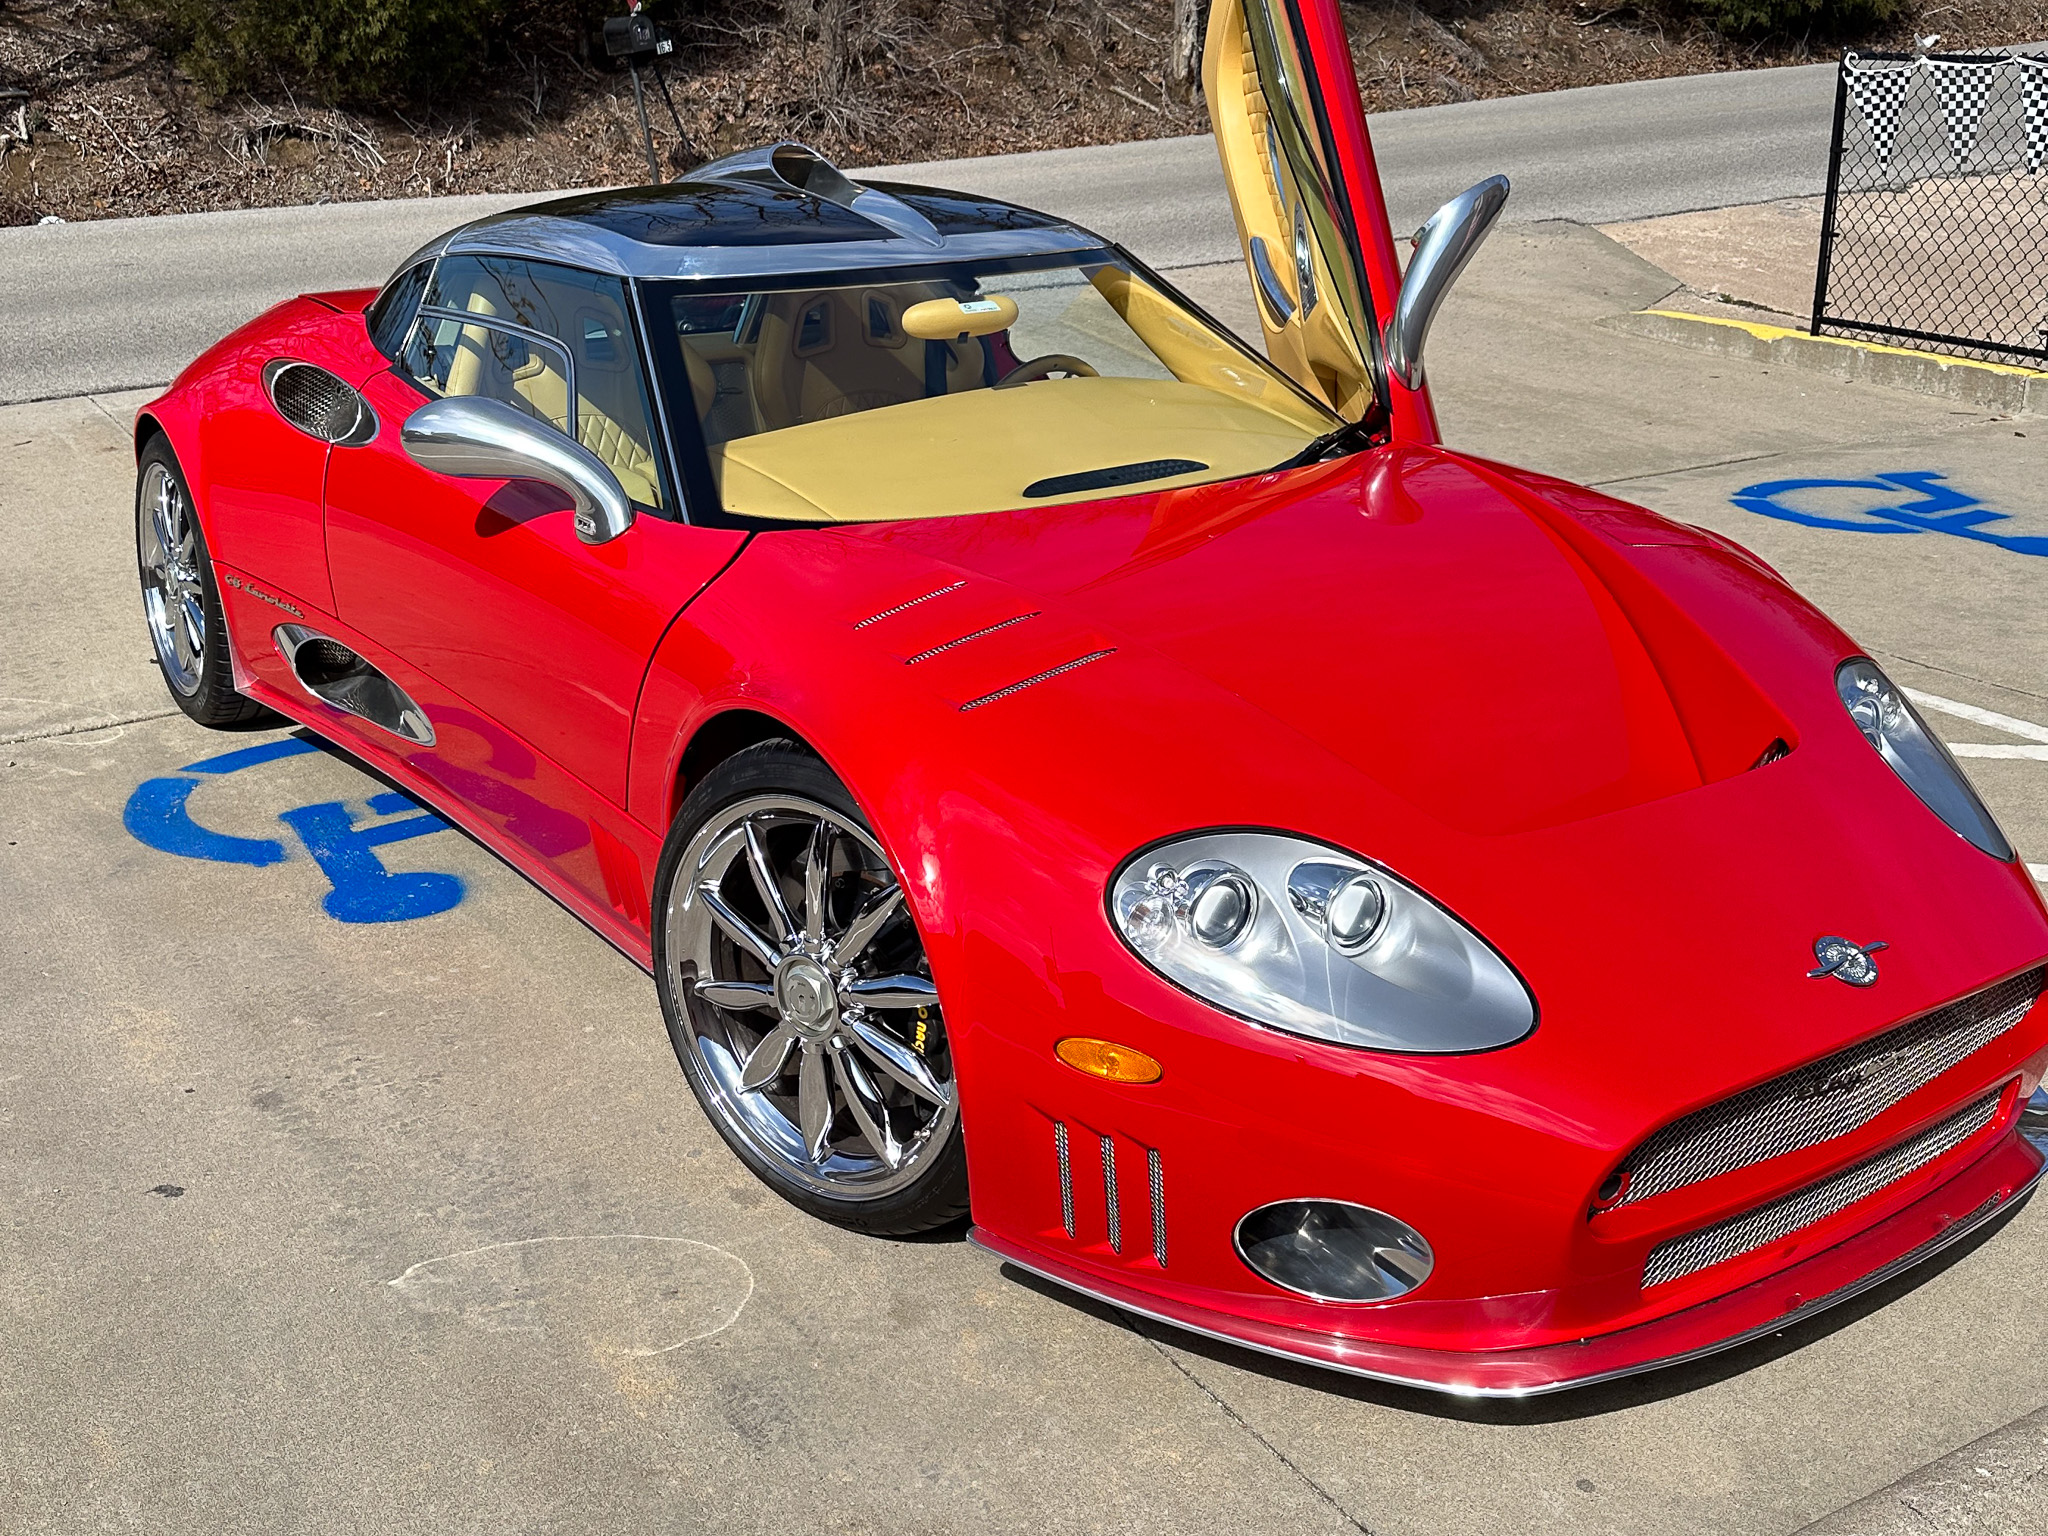 2000 Spyker C8 Spyder - Previously on display at the Heart of Route 66 Auto Museum om Sapulpa, OK